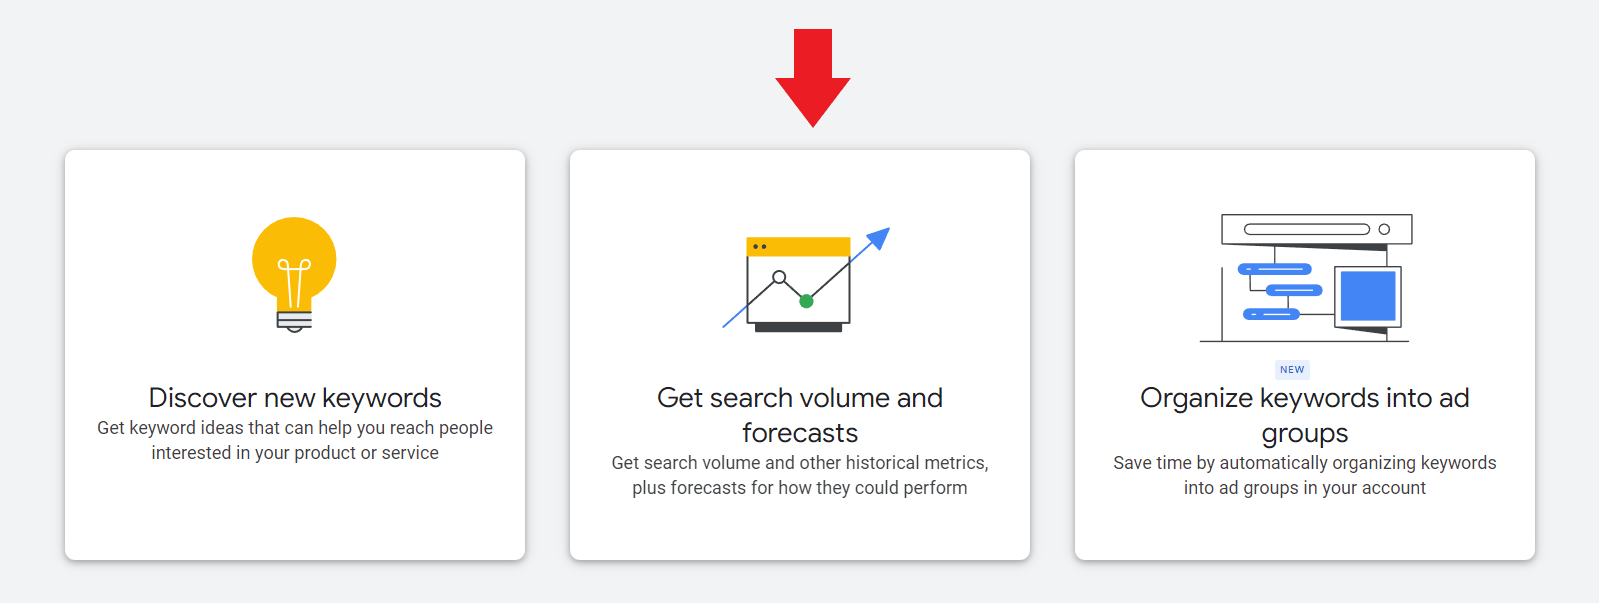 Get search volume forecasts